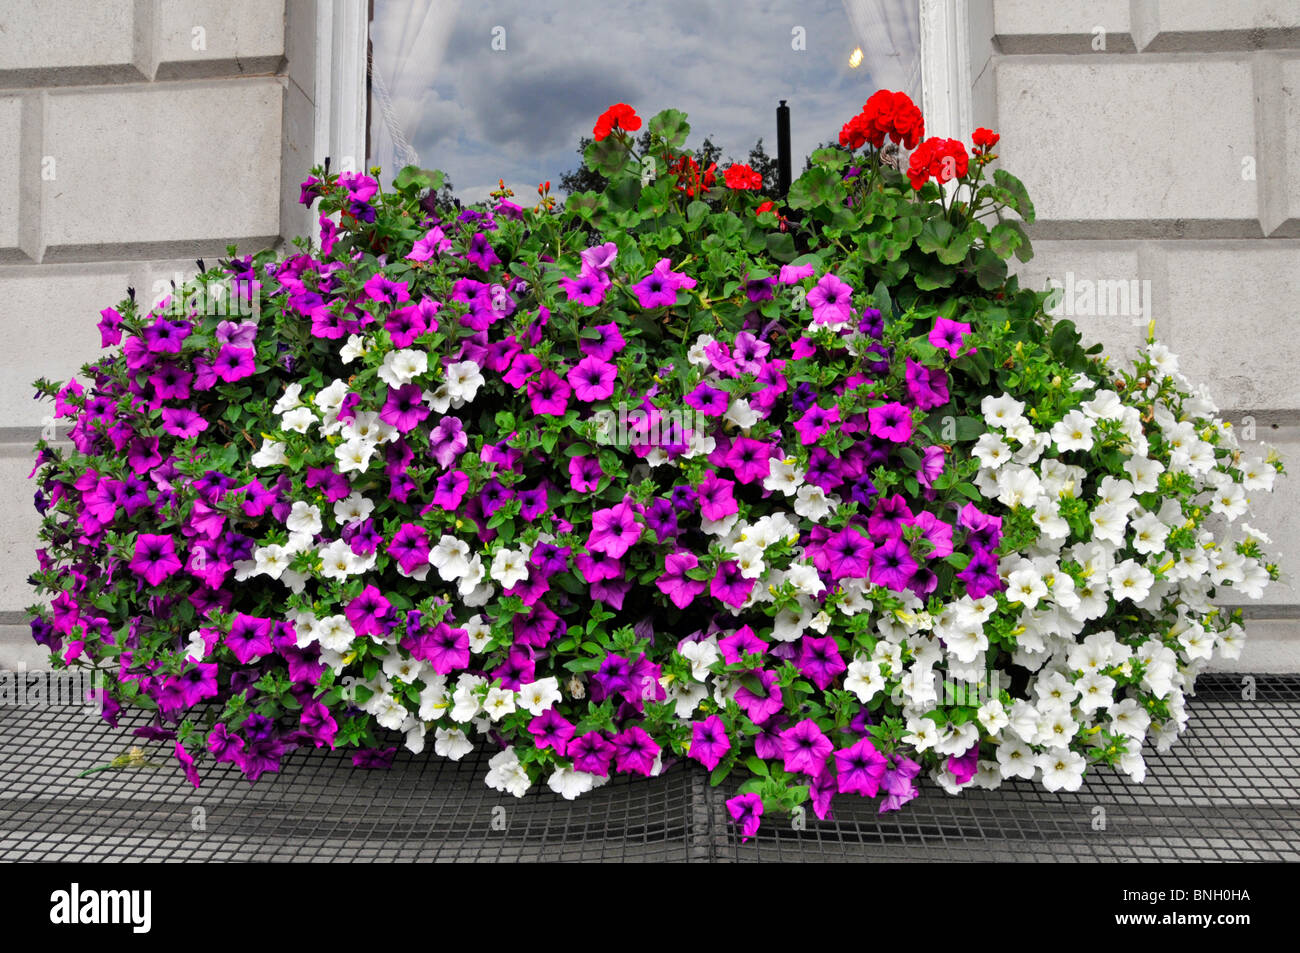 Close Up Of Colourful Display Of Petunias Flowers In Bloom In Window Stock Photo Alamy